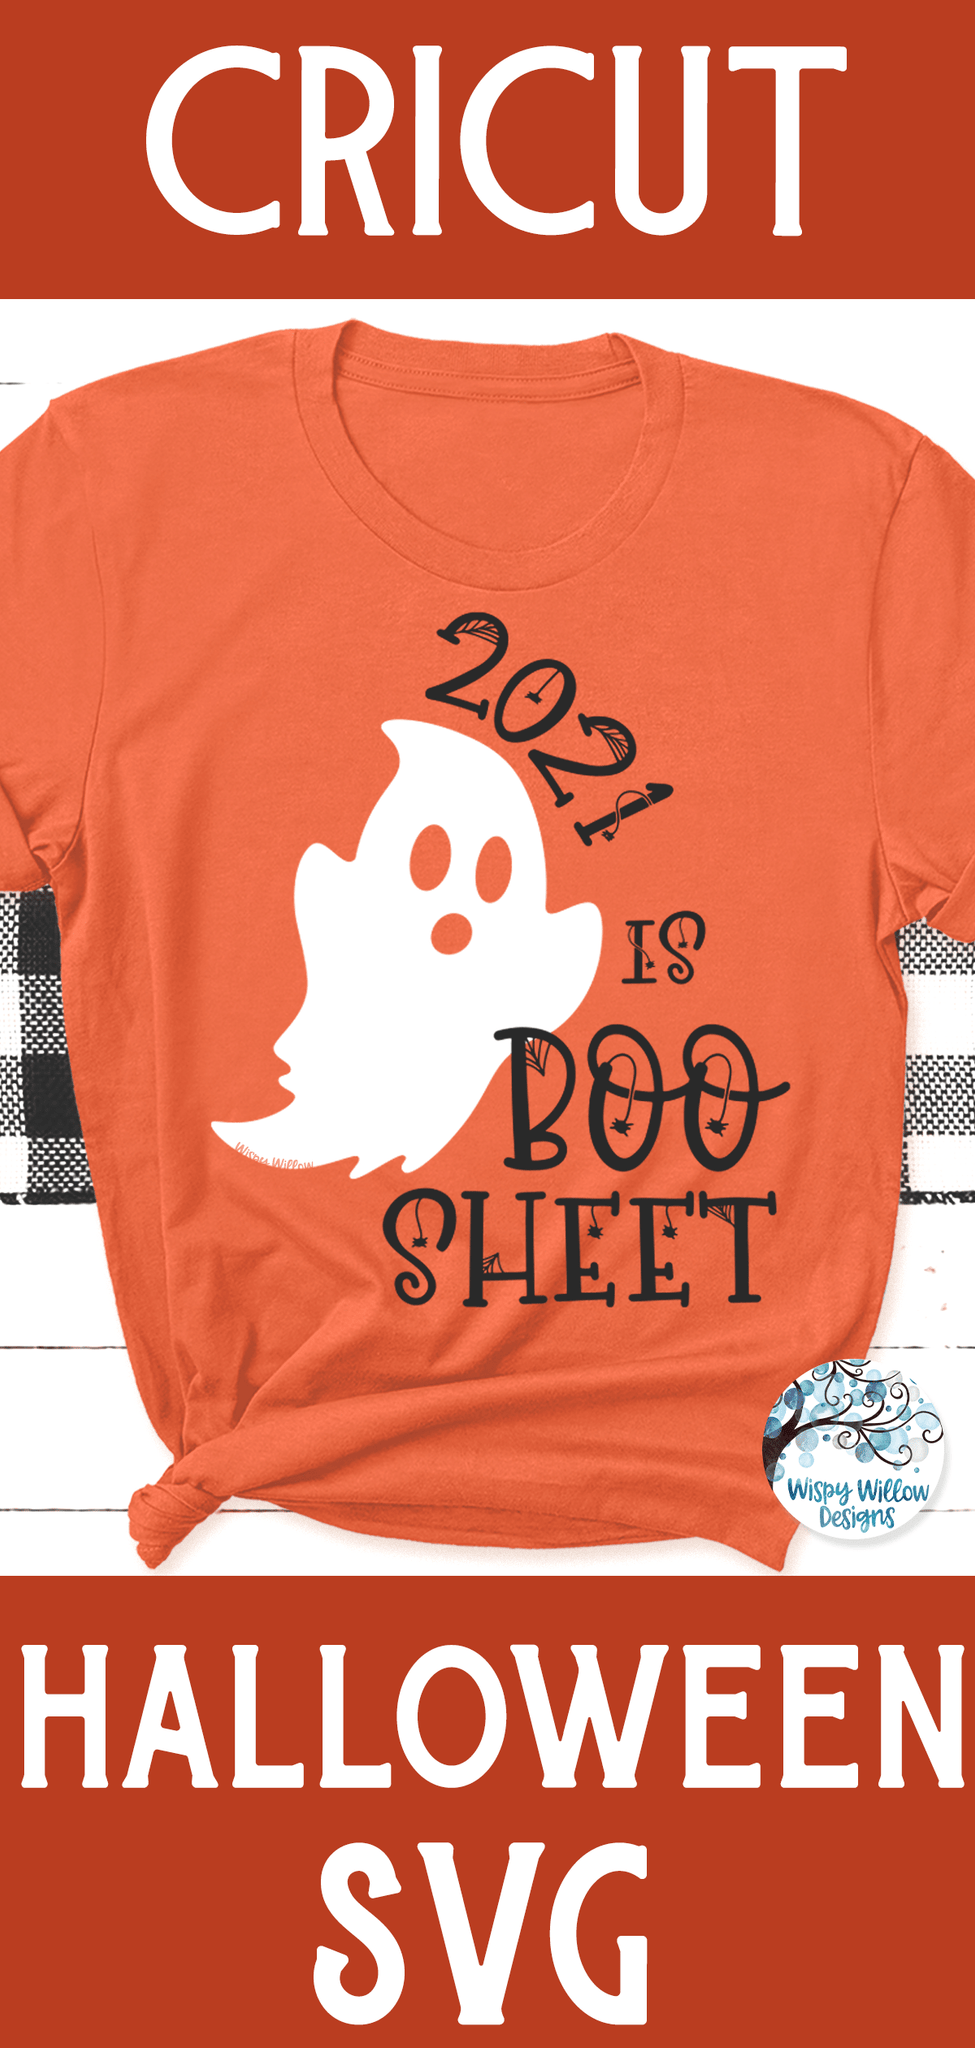 2021 is Boo Sheet SVG Wispy Willow Designs Company